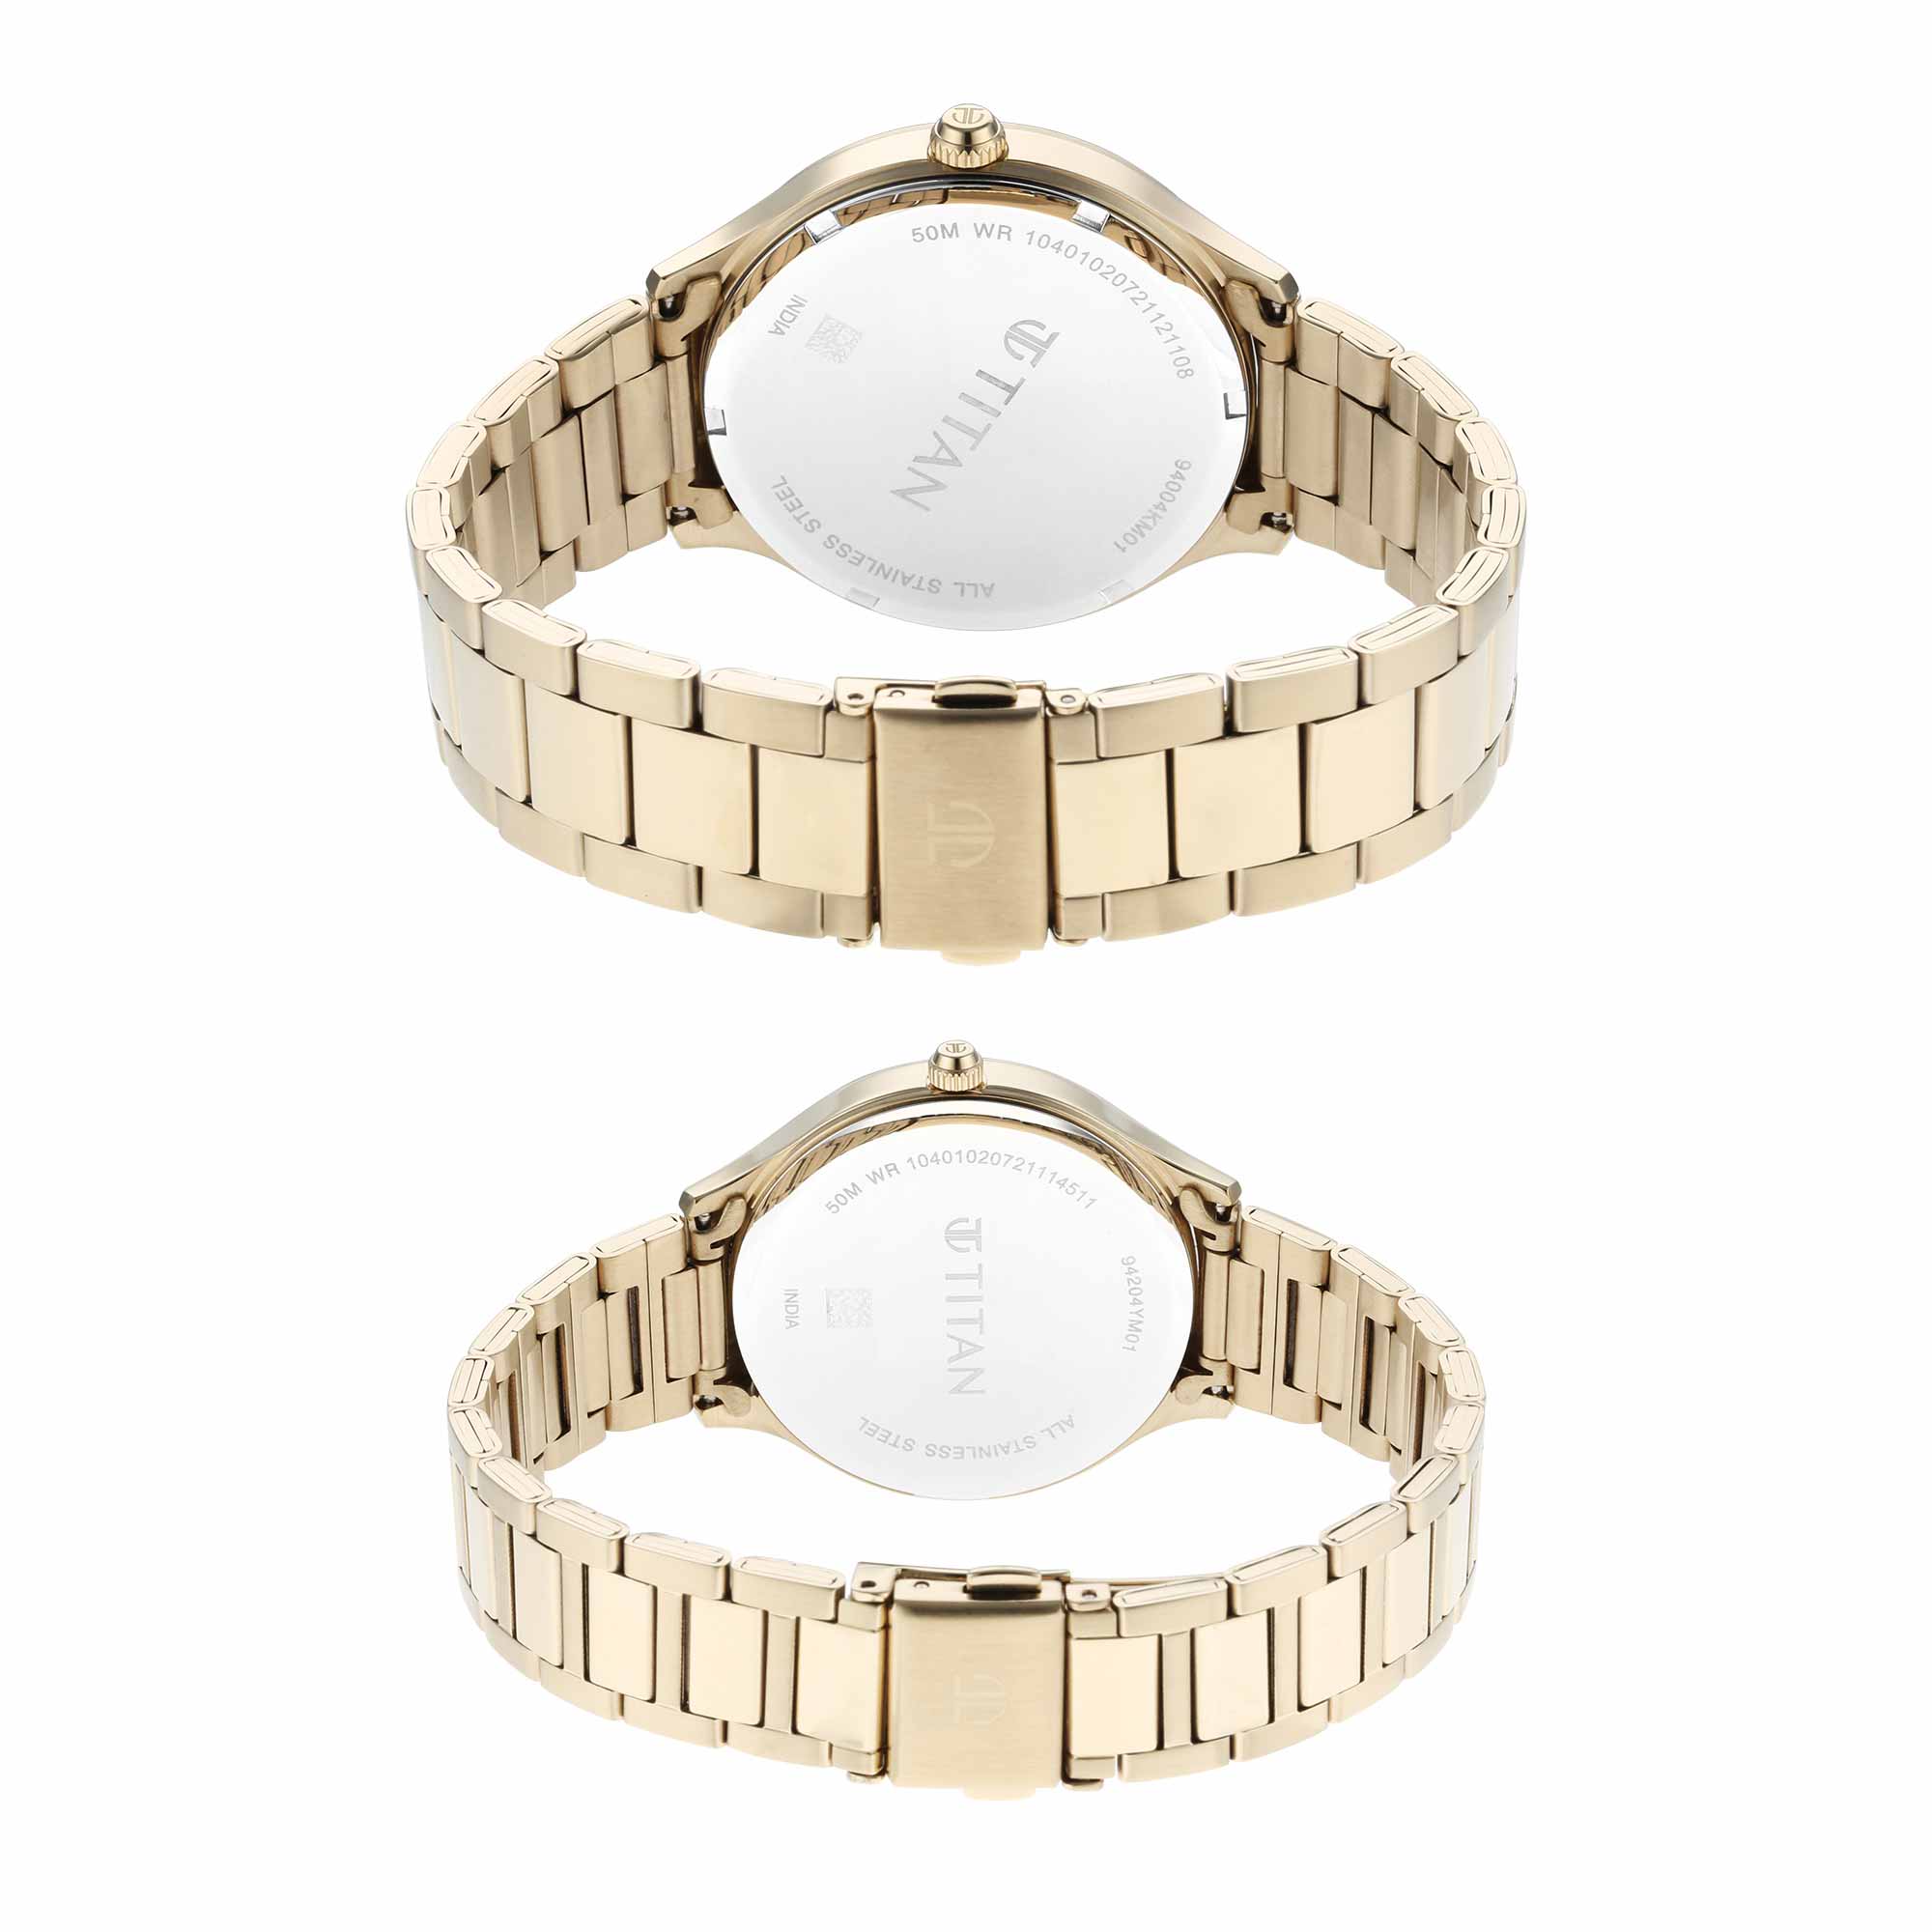 Titan Bandhan Silver Dial Multi Stainless Steel Strap watch for Couple.